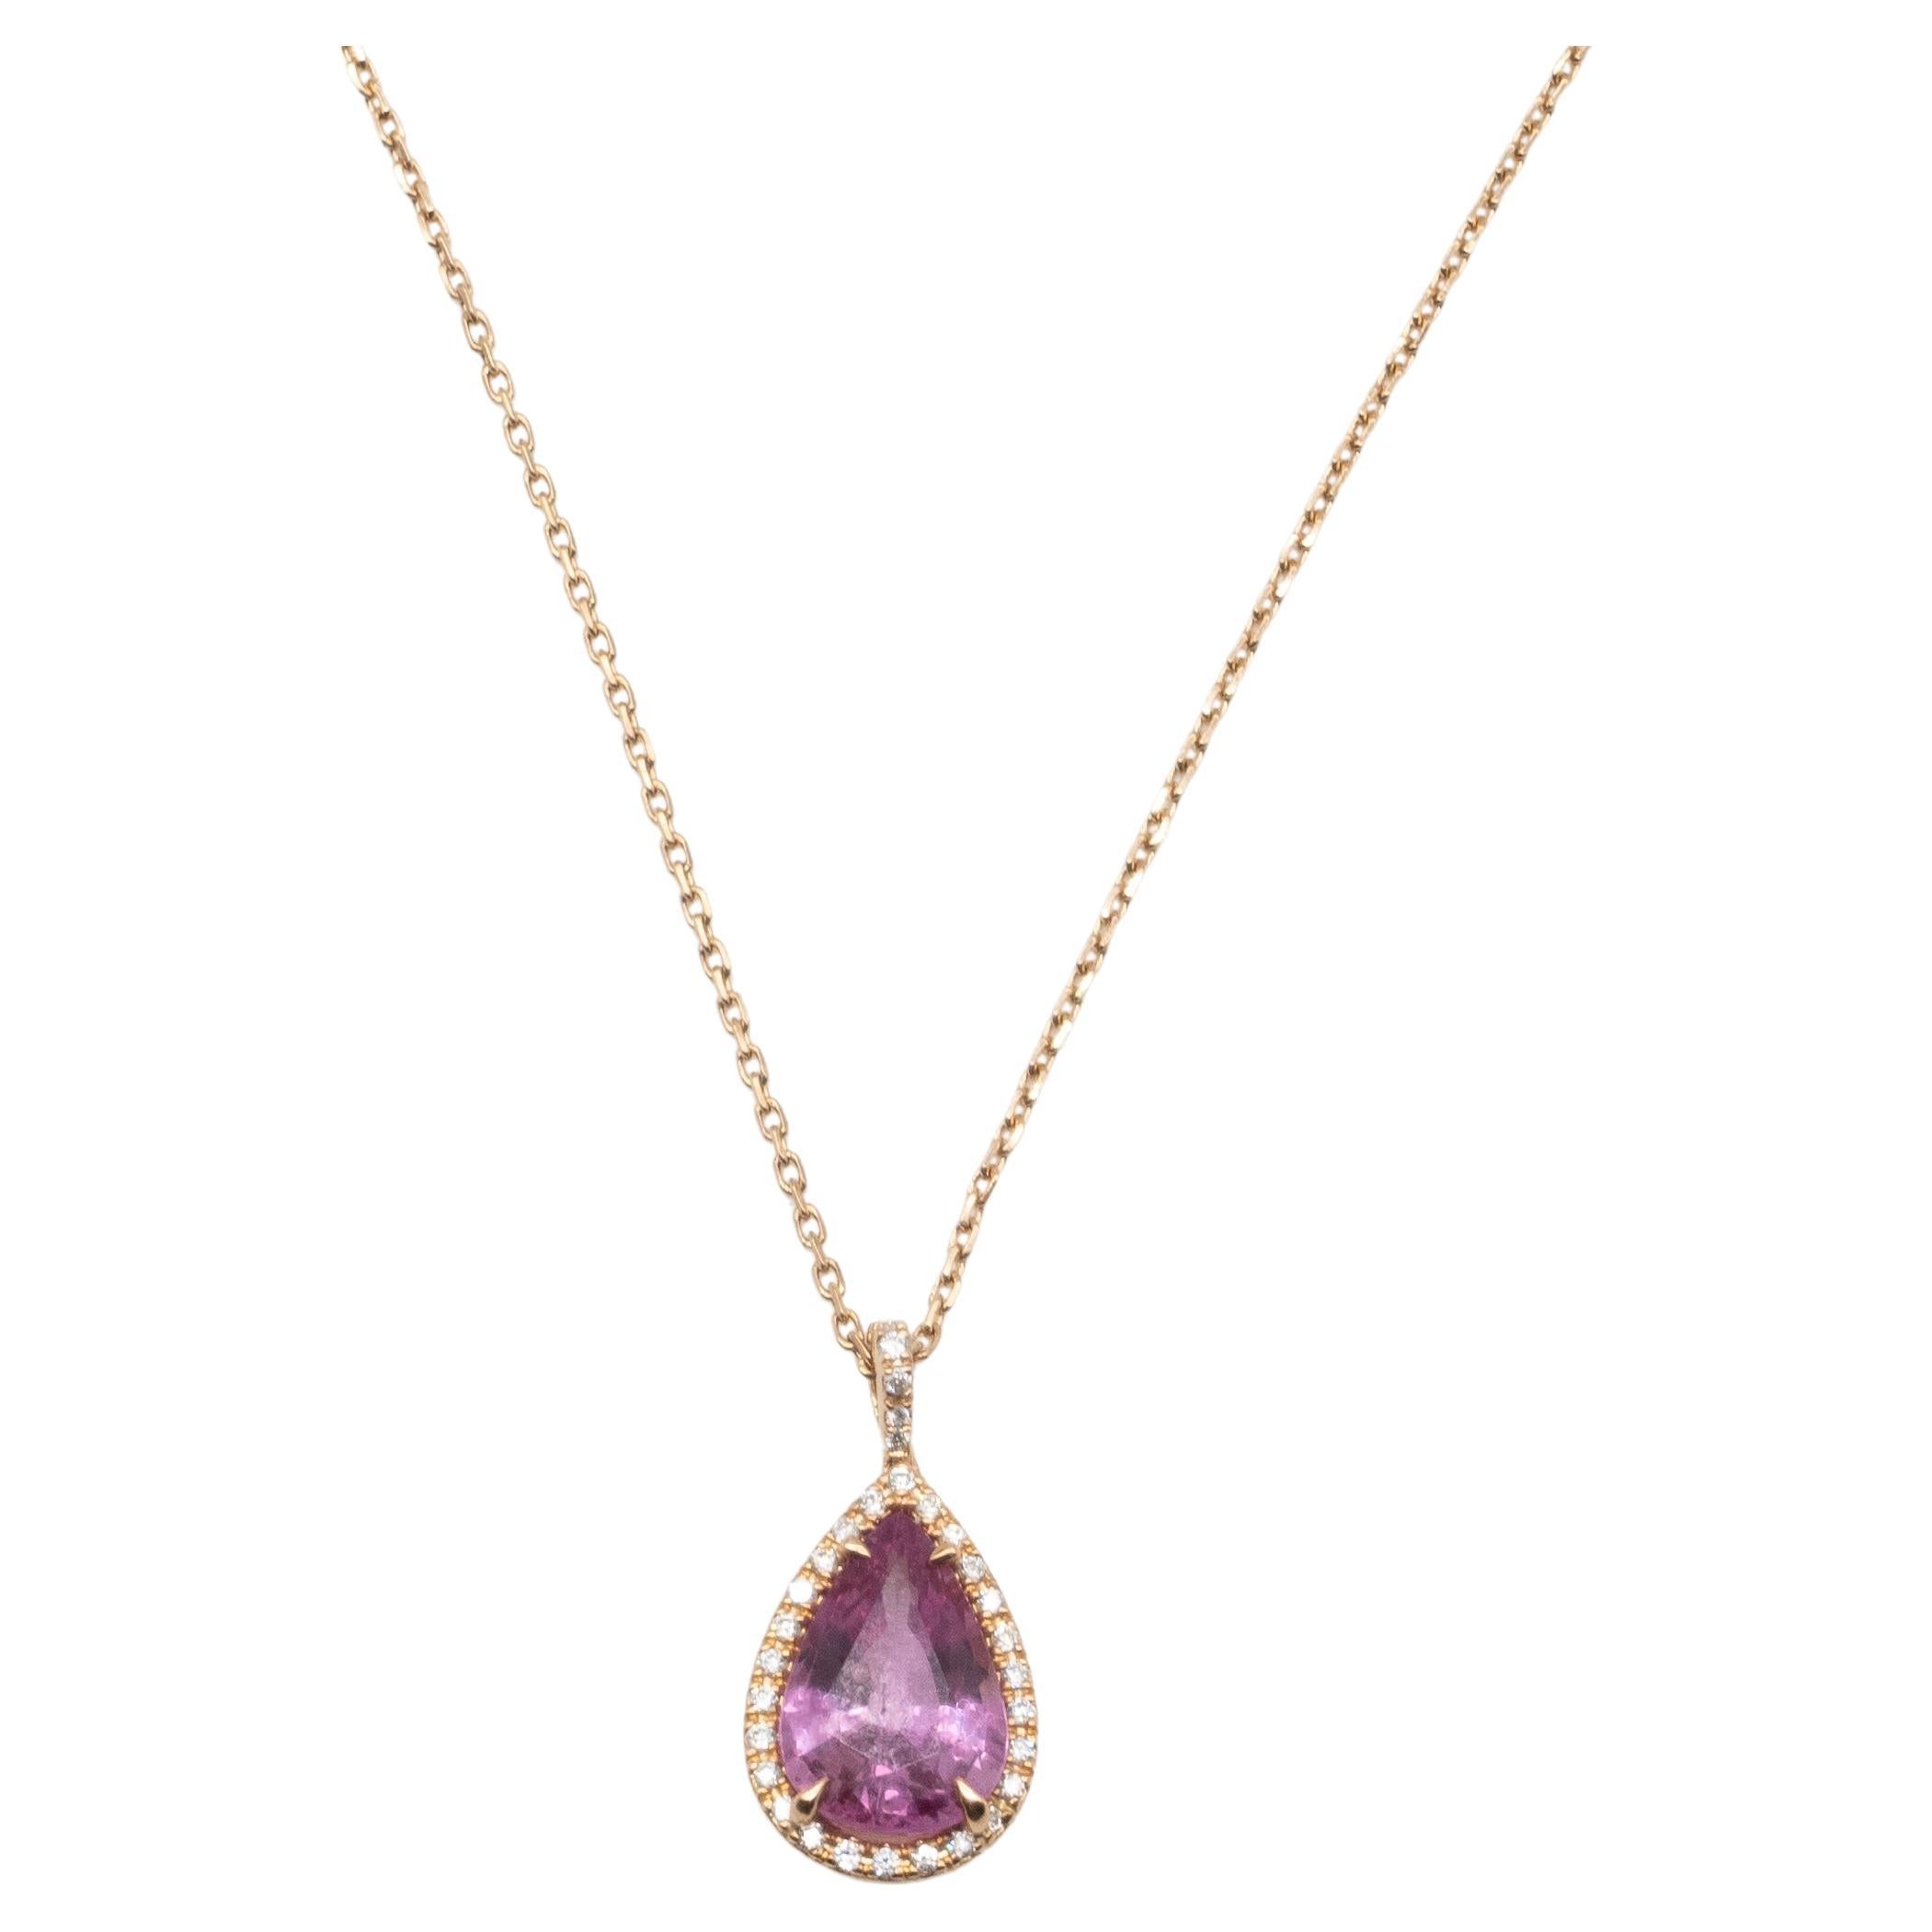 Discover timeless elegance embodied in our 18kt Rose Gold Pendant Necklace adorned with sparkling Pink Sapphire and glittering diamonds.

The pendant features a brilliant Pink Sapphire in the center, symbolizing love and passion, surrounded by